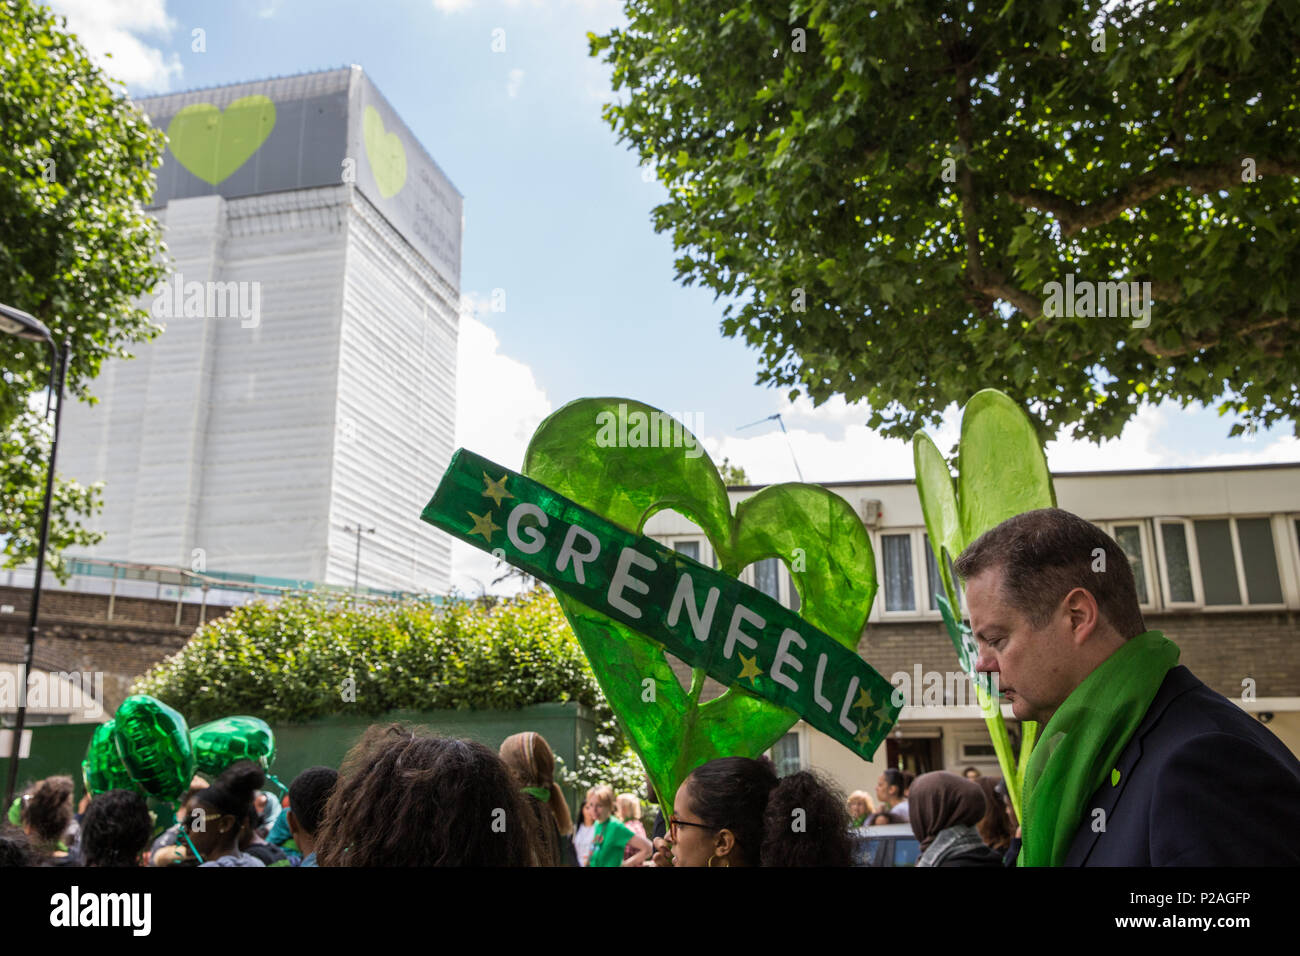 London, UK. 14th June, 2018. Members of the local community, faith leaders, politicians and wellwishers pass the Grenfell Tower, now covered, as they take part in a silent procession from St Helen's Church to the Wall of Truth to mark the first anniversary of the Grenfell Tower Fire. Credit: Mark Kerrison/Alamy Live News Stock Photo